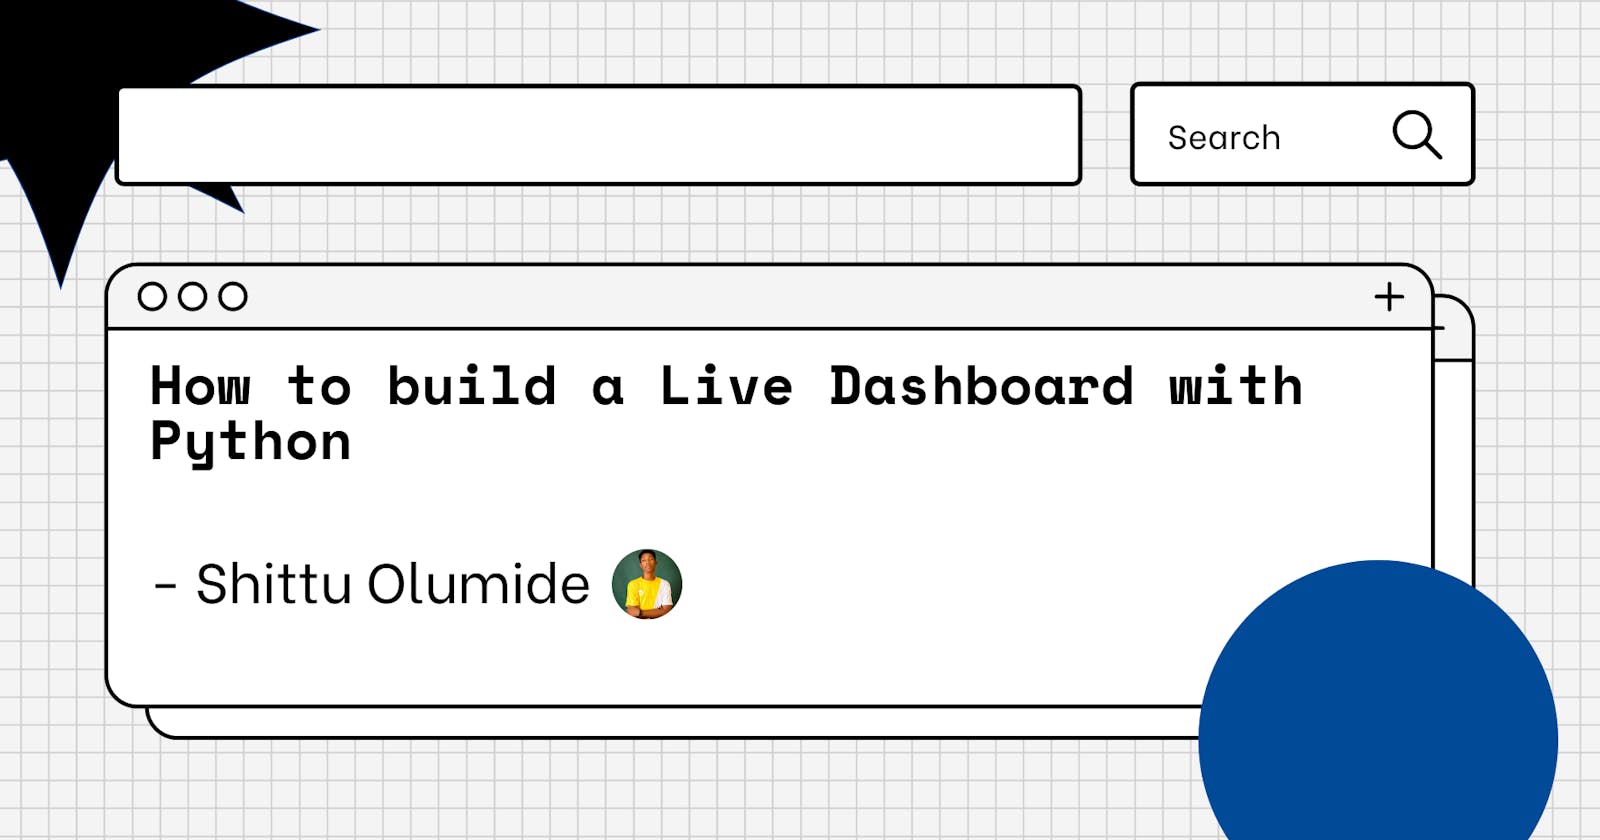 How to build a Live Dashboard with Python